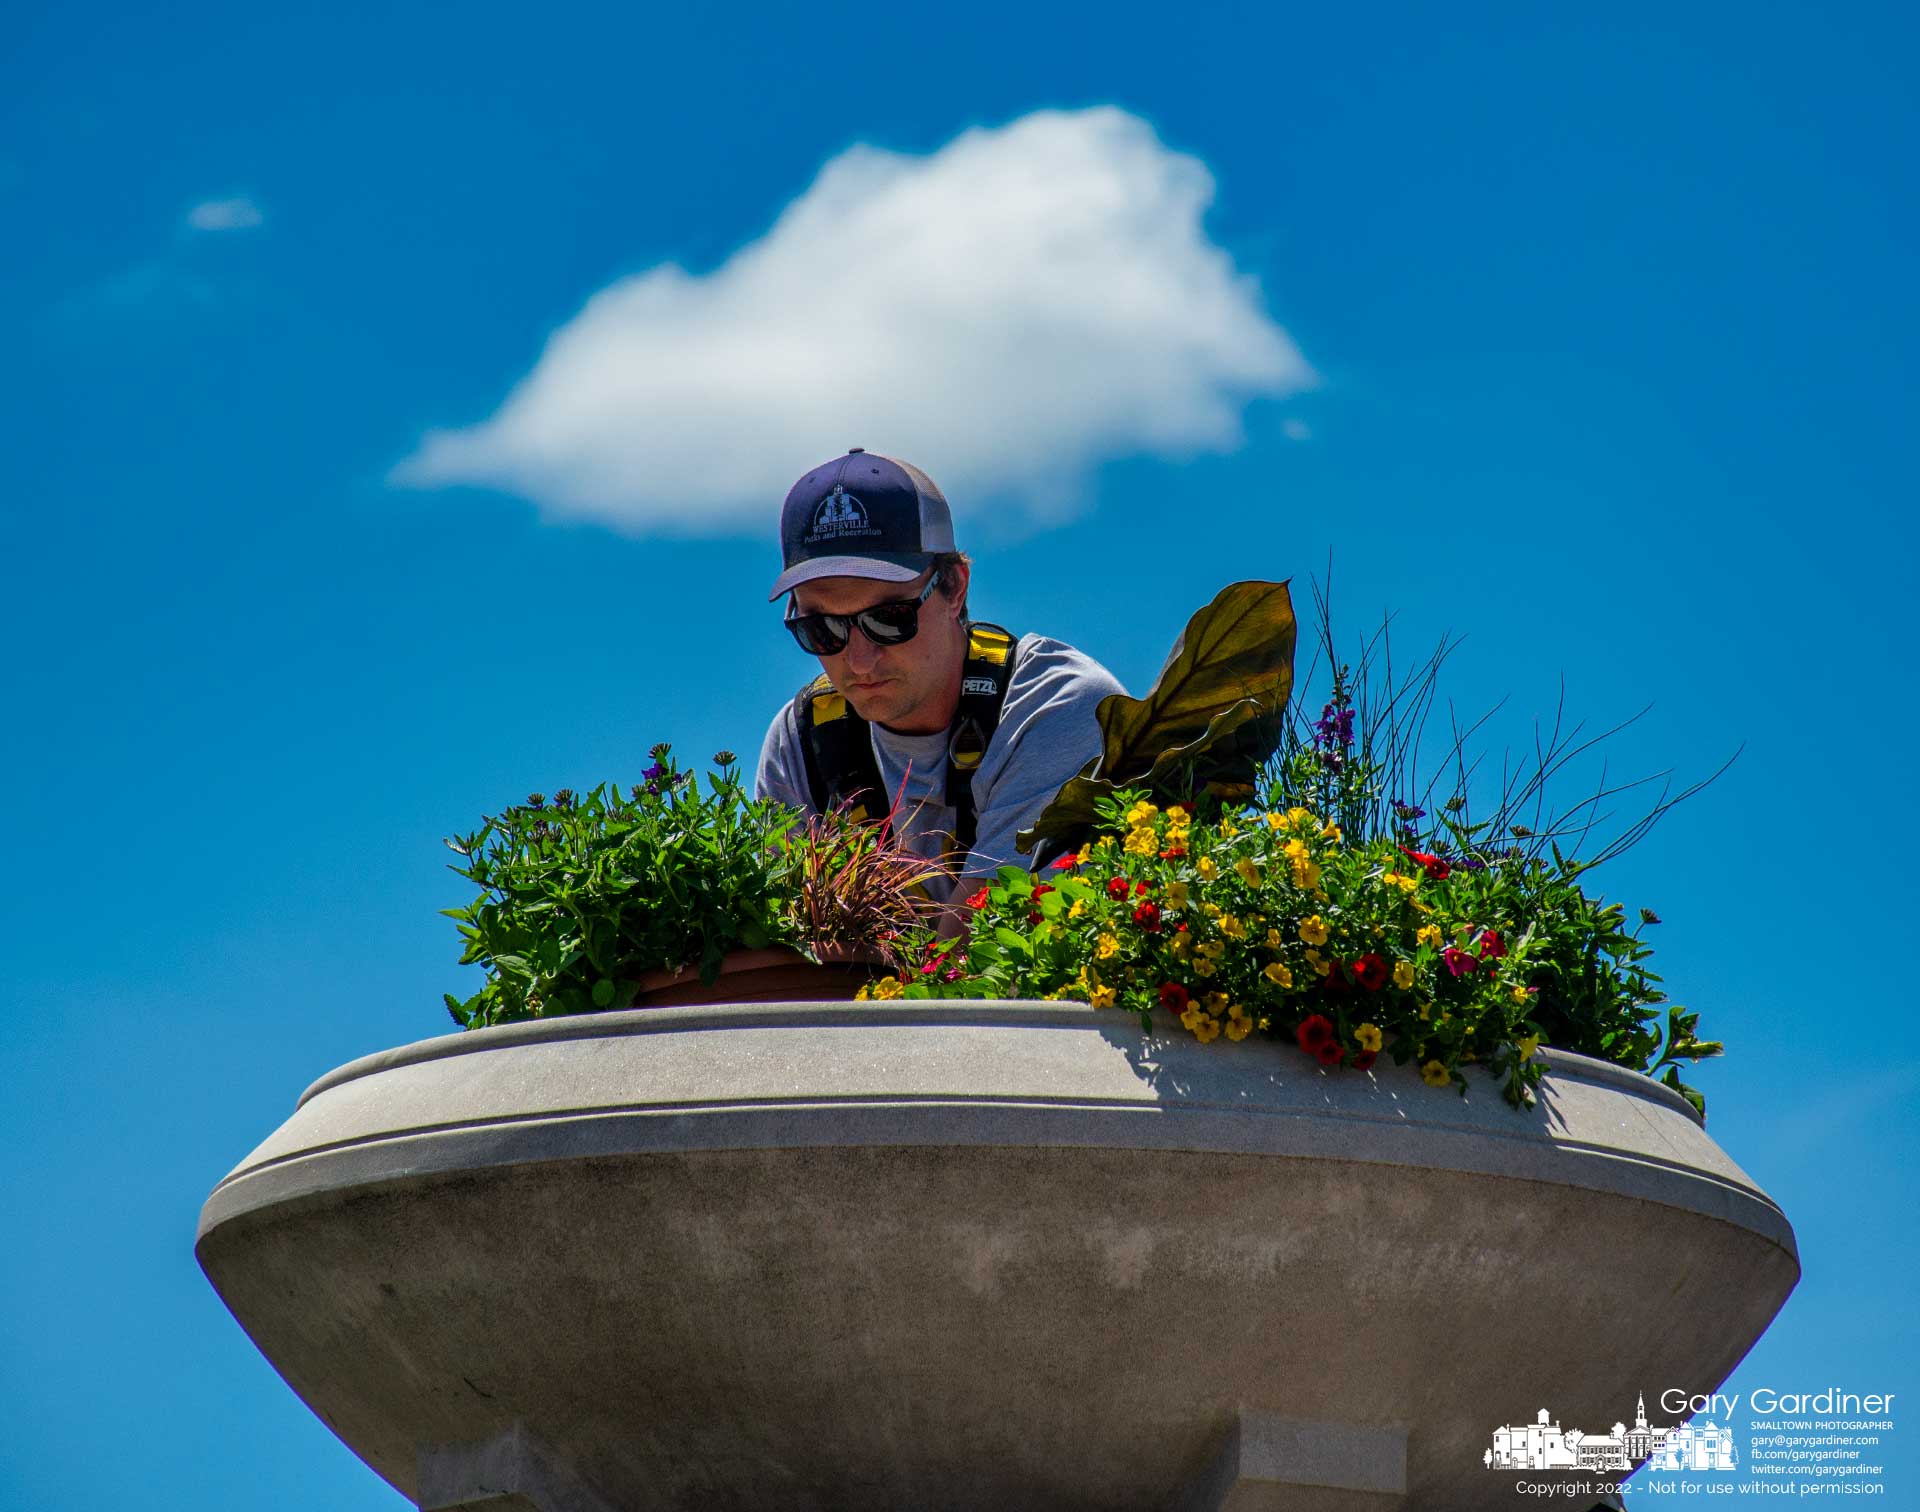 A Westerville Parks worker places a selection of flowers and Spring greenery into one of the large planters at the top of the entrance post to the parking lot behind city hall. My Final Photo for May 13, 2022.